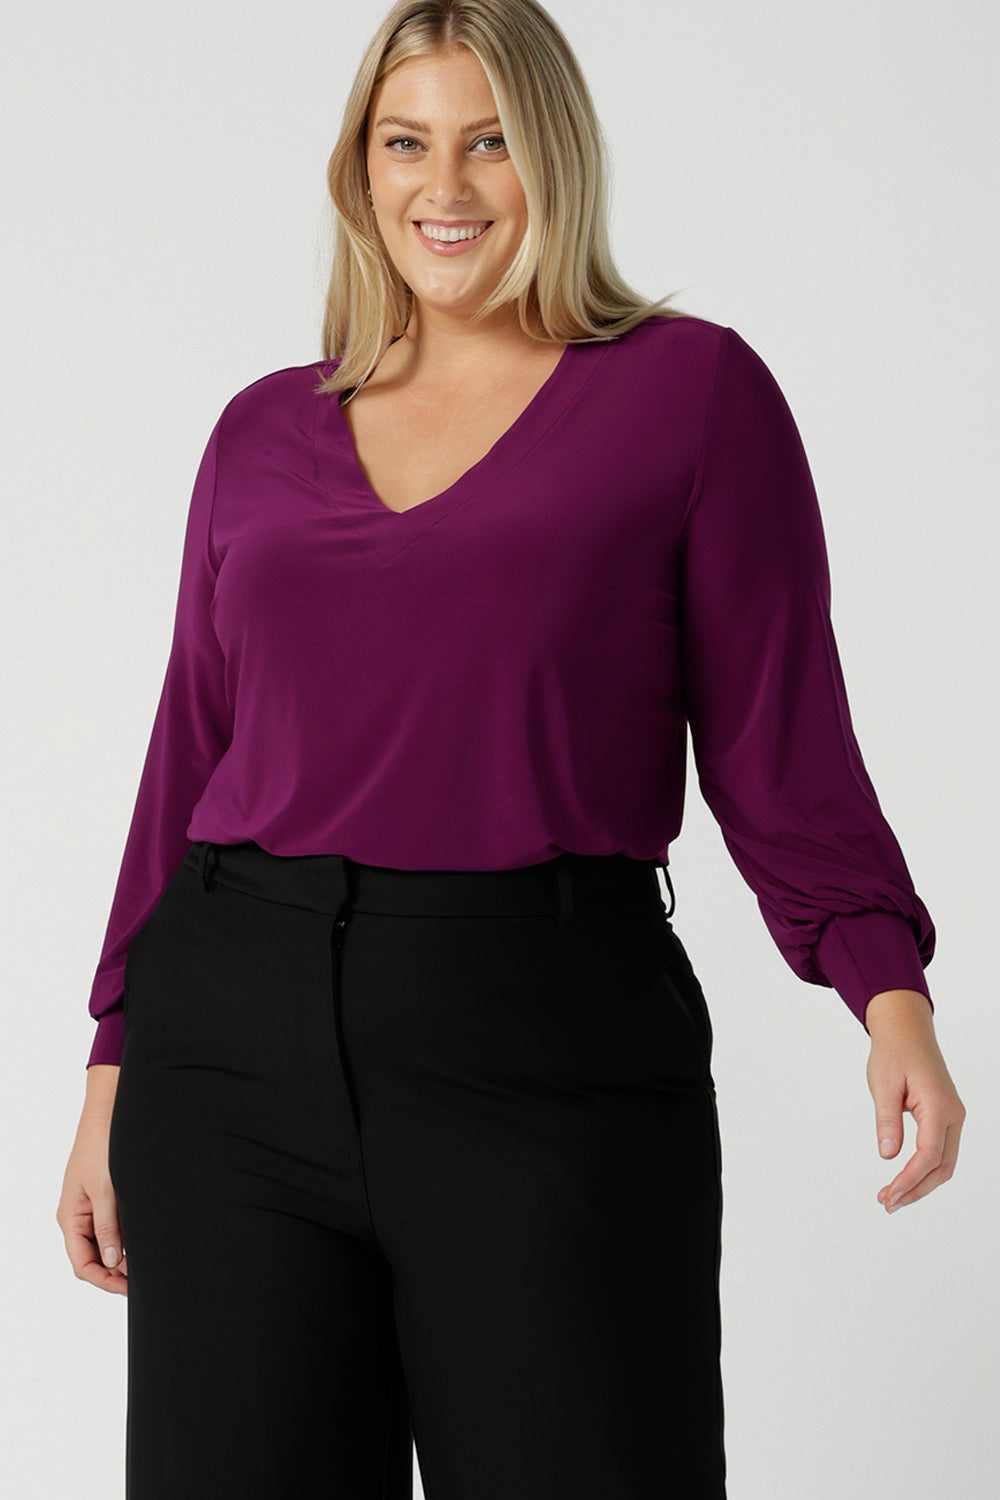 A size 18 woman wearing the Avery top in Magenta. A soft v-neck top with balloon sleeves and cuff detail. Made in Australia for women size 8 - 24. 